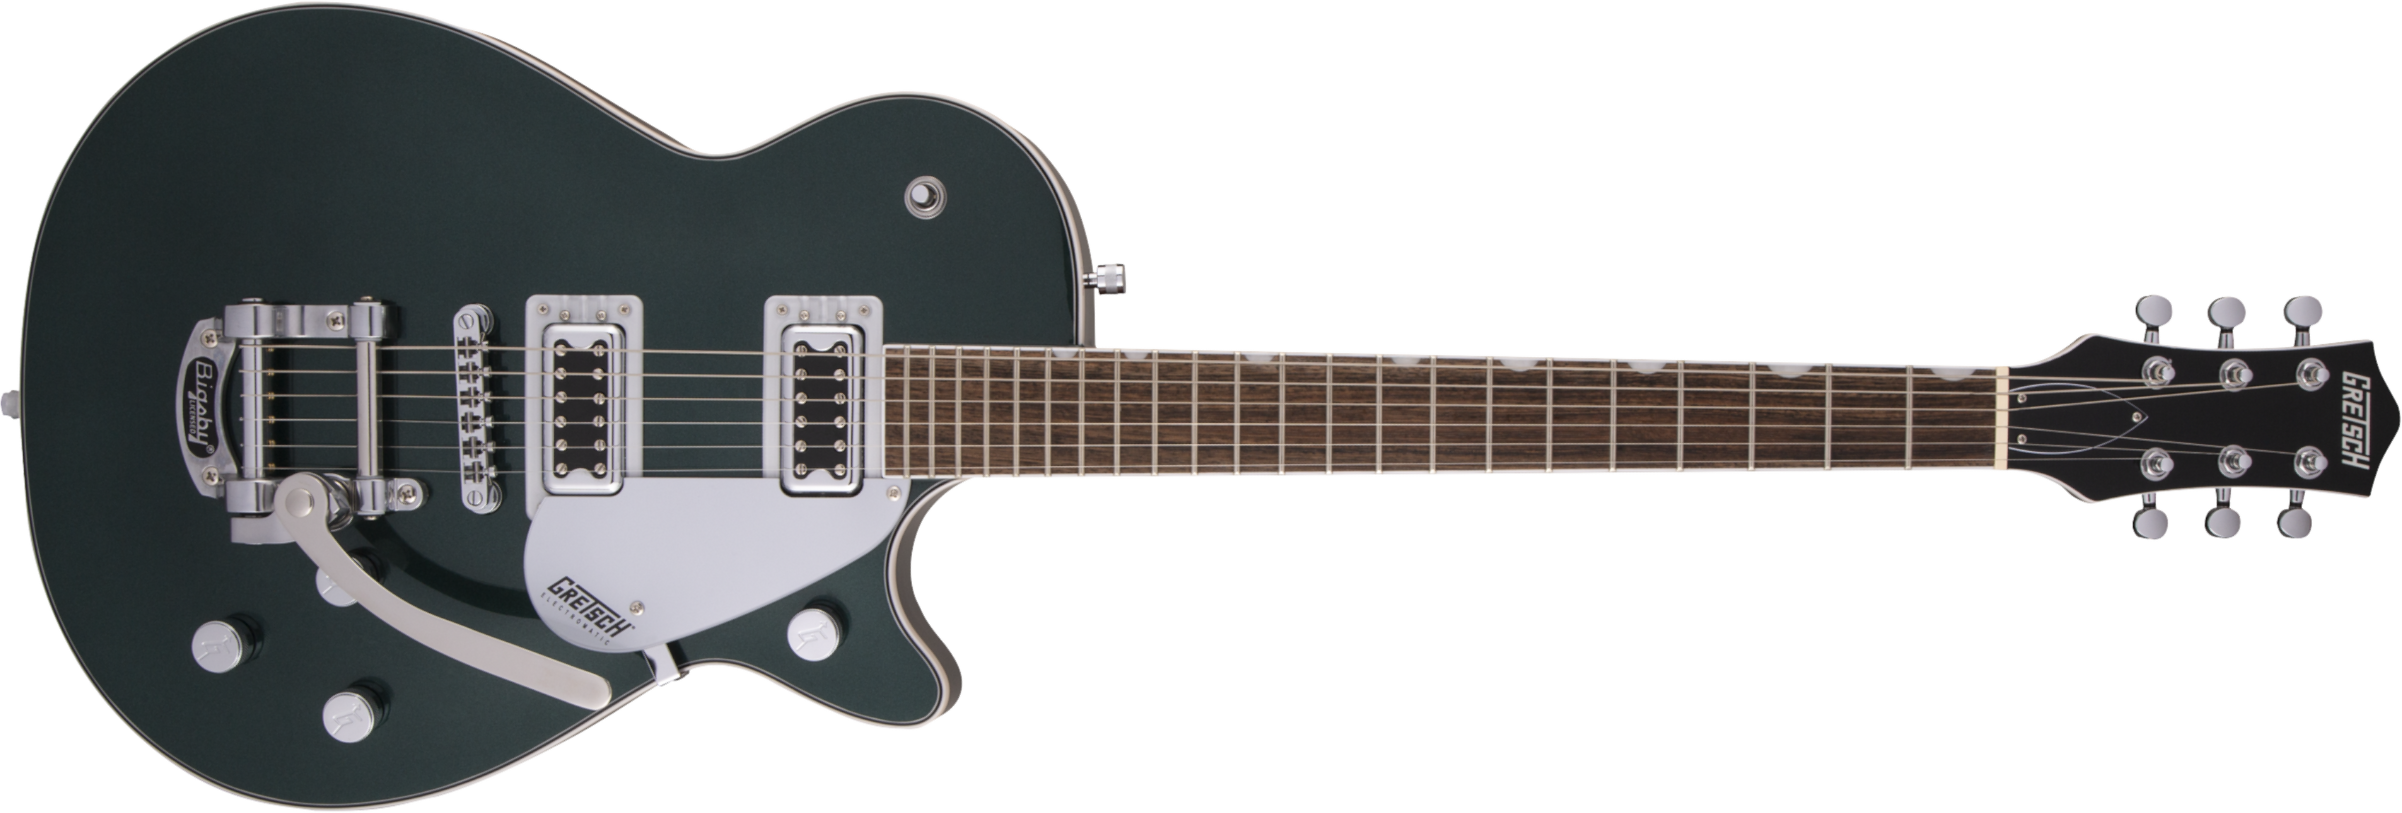 Gretsch G5230t Electromatic Jet Ft Single-cut Bigsby 2h Trem Lau - Cadillac Green - Single cut electric guitar - Main picture